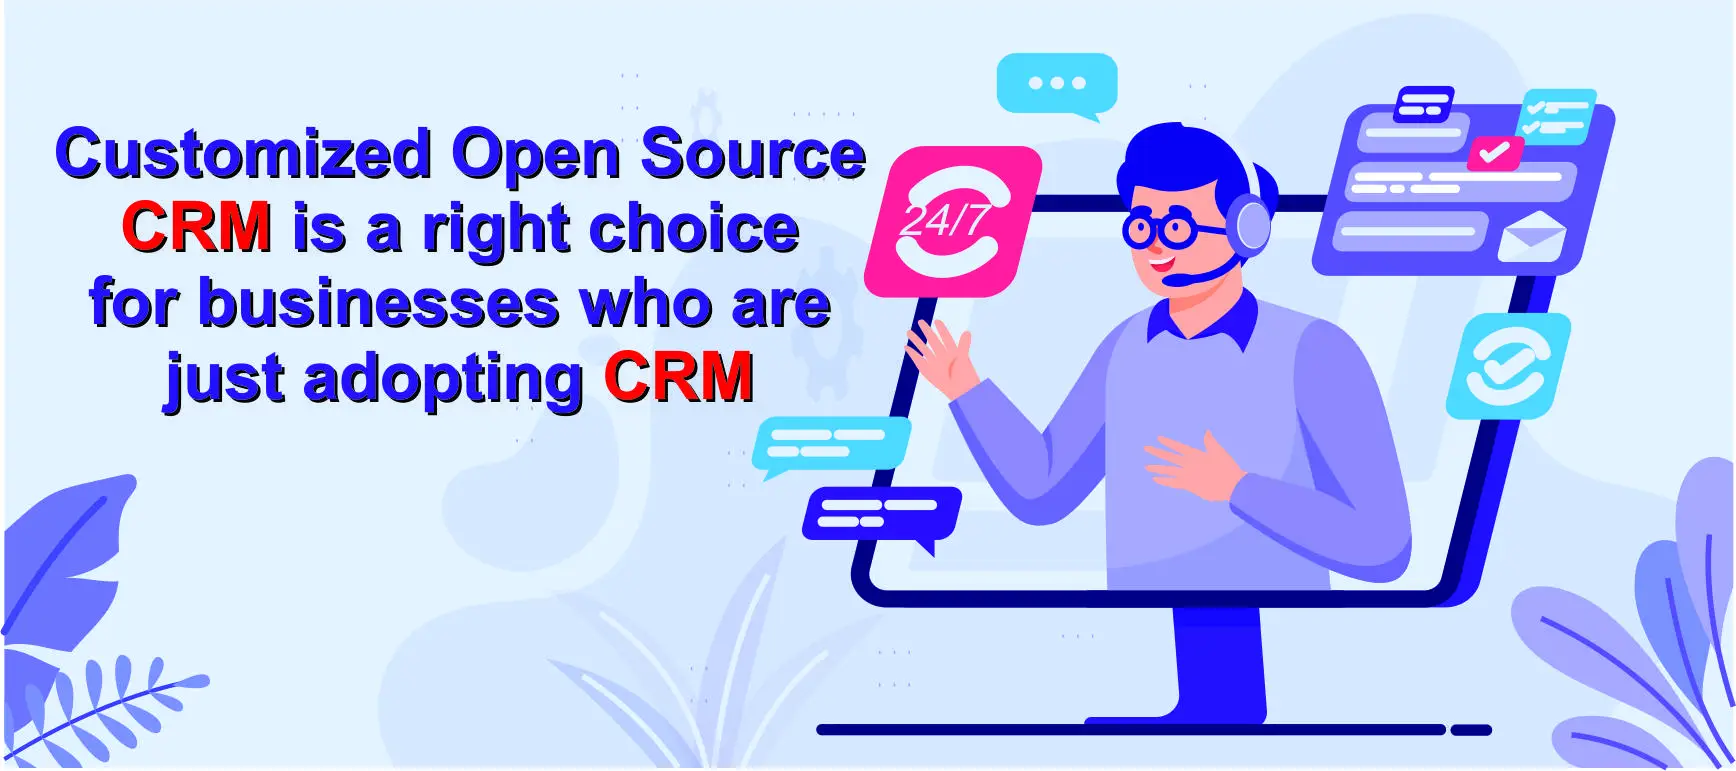 customized-open-source-crm-is-a-right-choice-for-businesses-who-are-just-adopting-crm